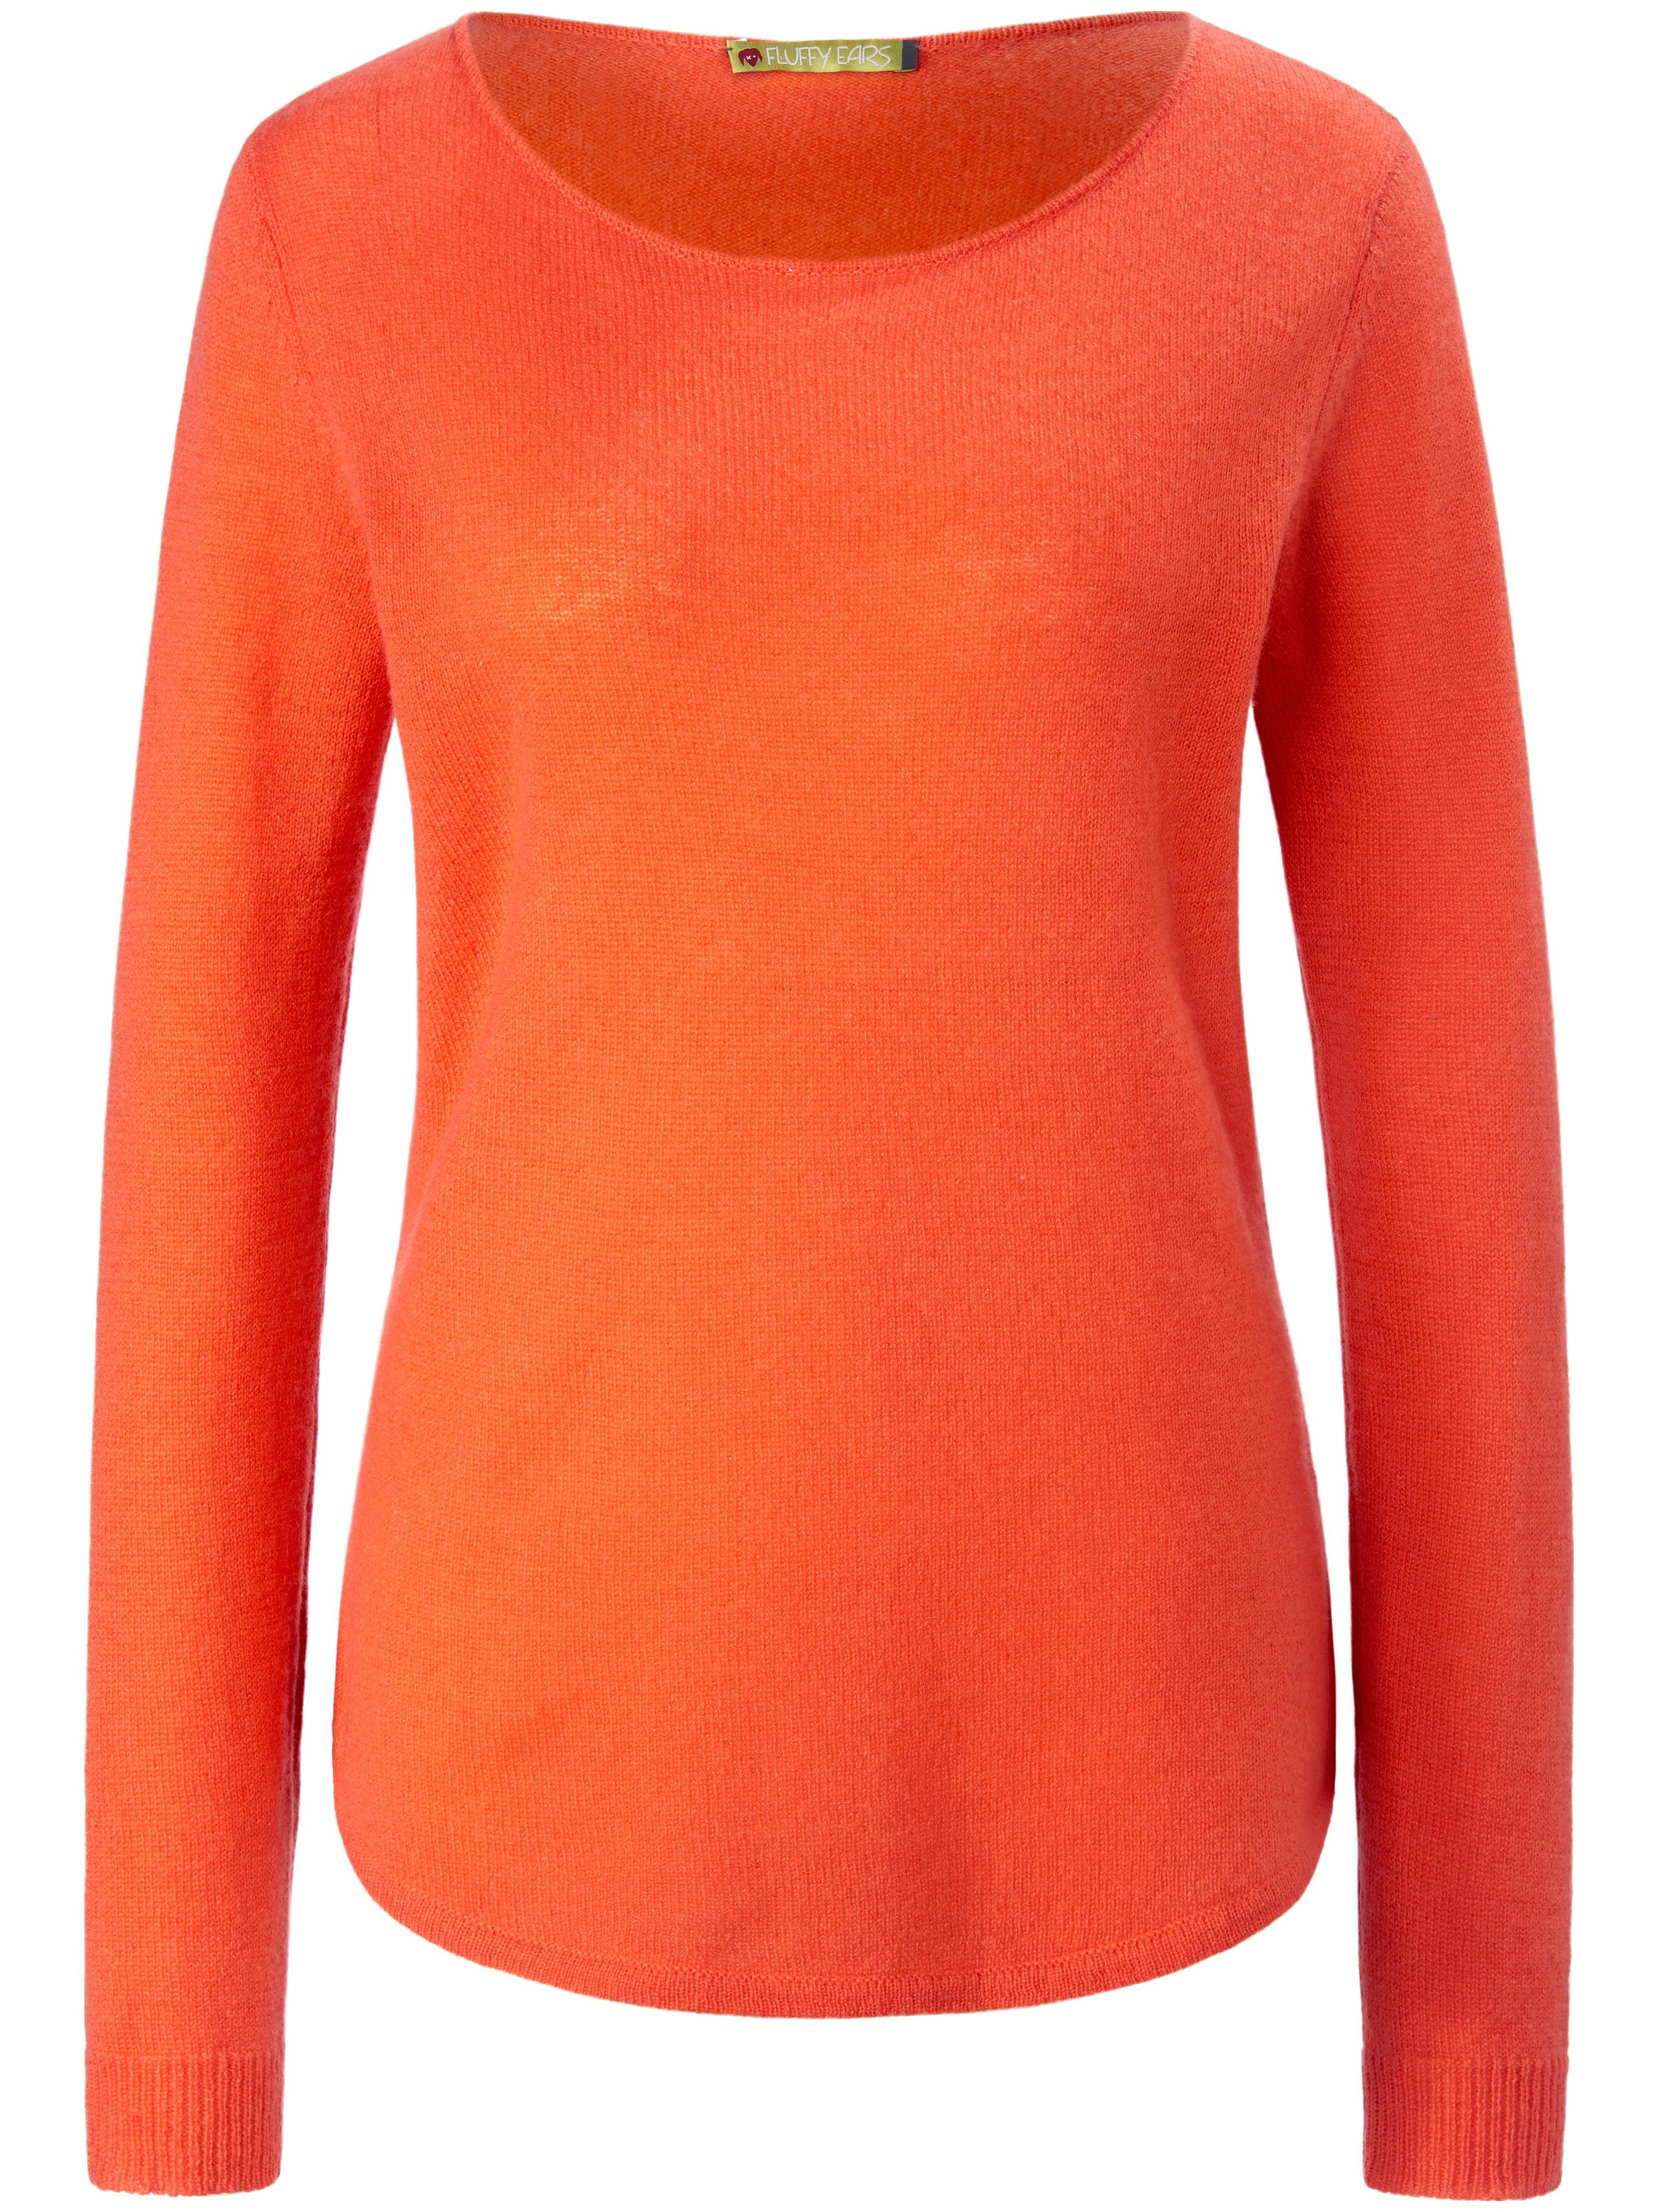 Le pull 100% cachemire  FLUFFY EARS orange taille 40